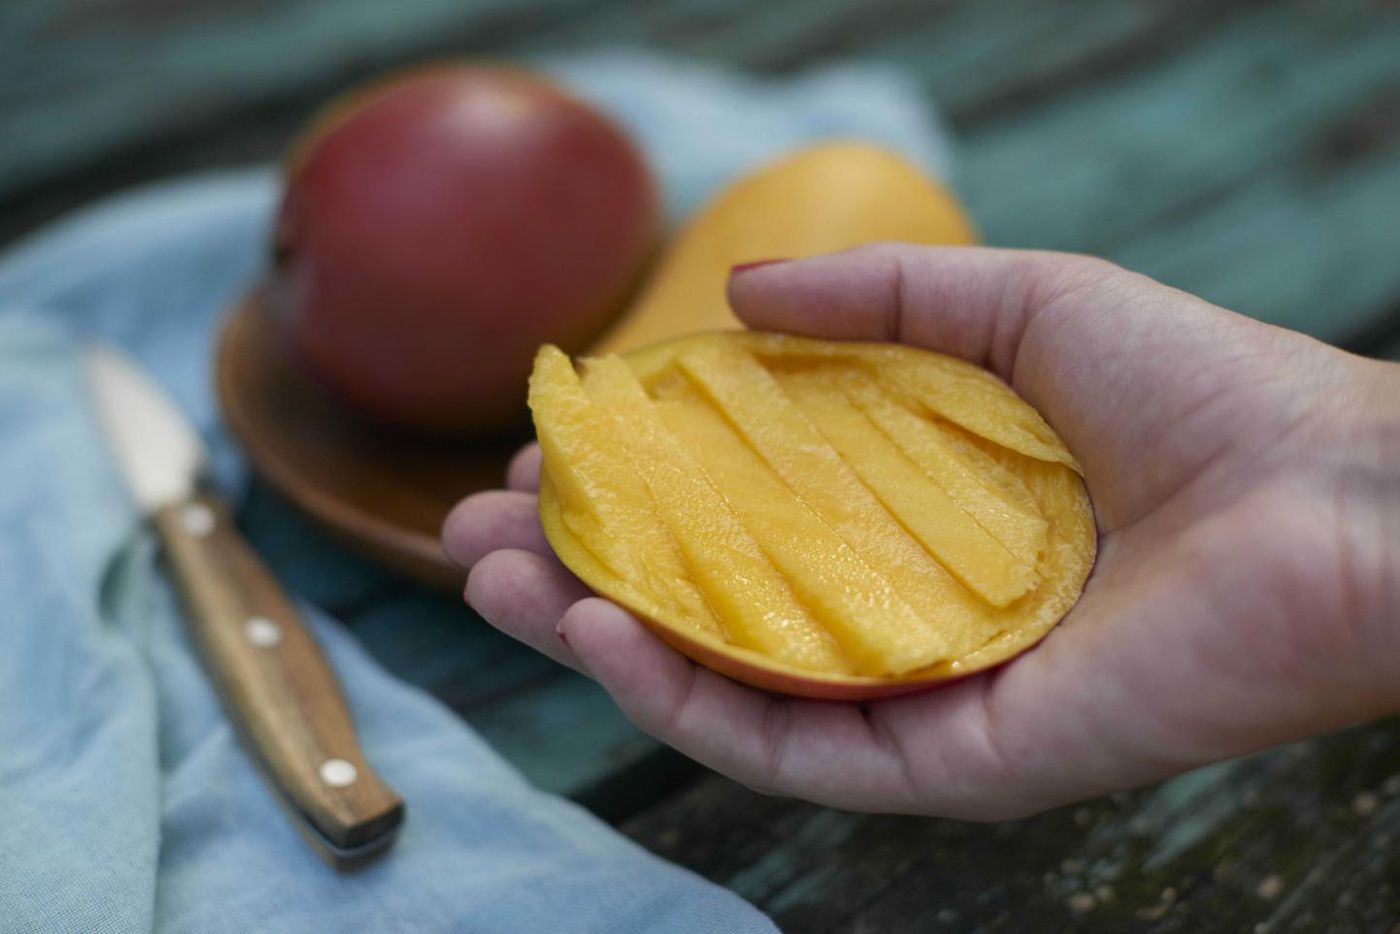 This is the first human trial to demonstrate the favorable vascular effects of mango consumption. Credit: UCDavis